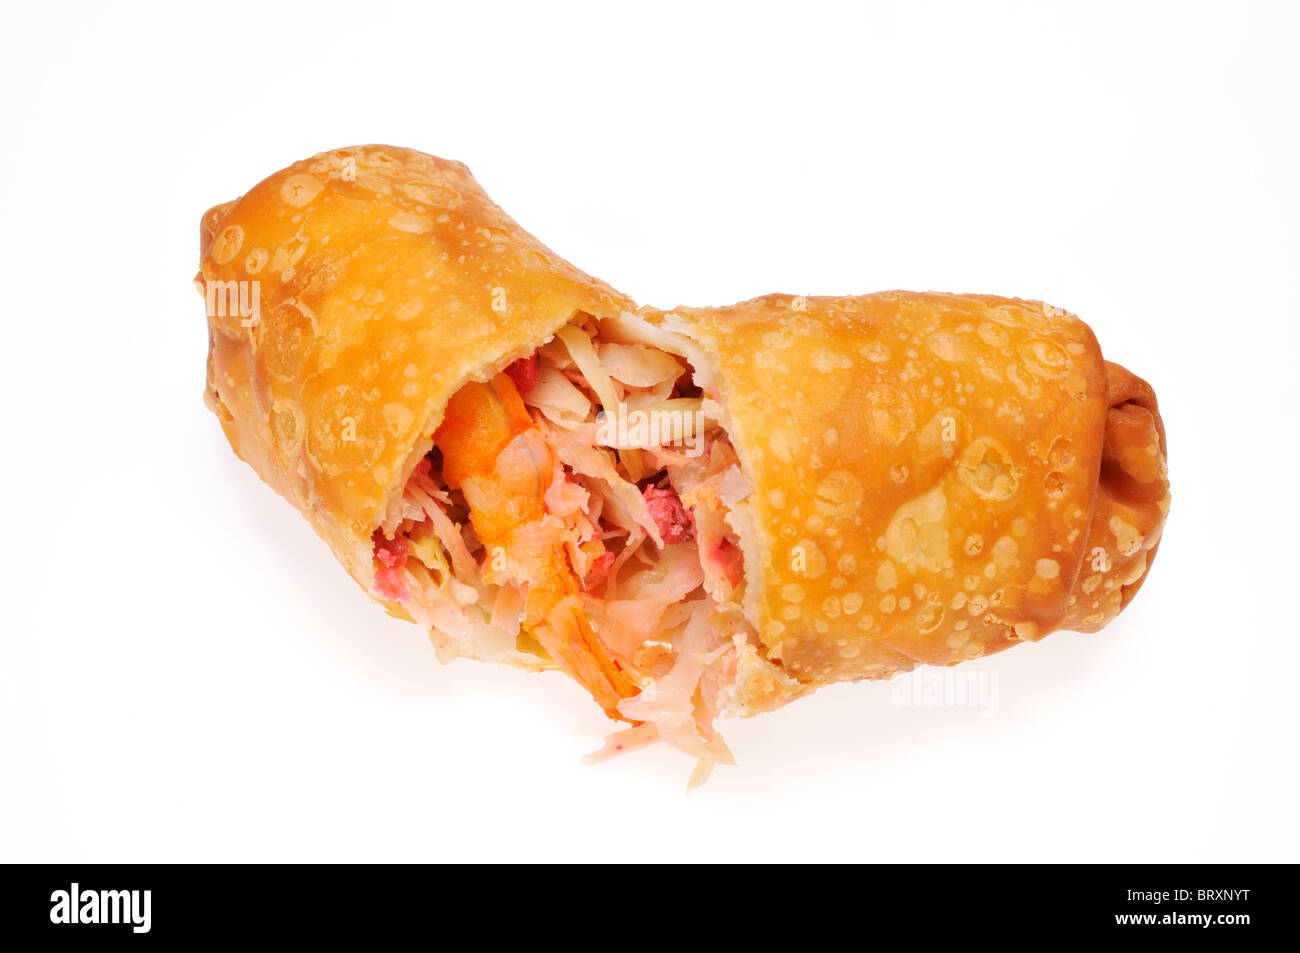 An eggroll cut in half showing its ingredients on white background cutout Stock Photo